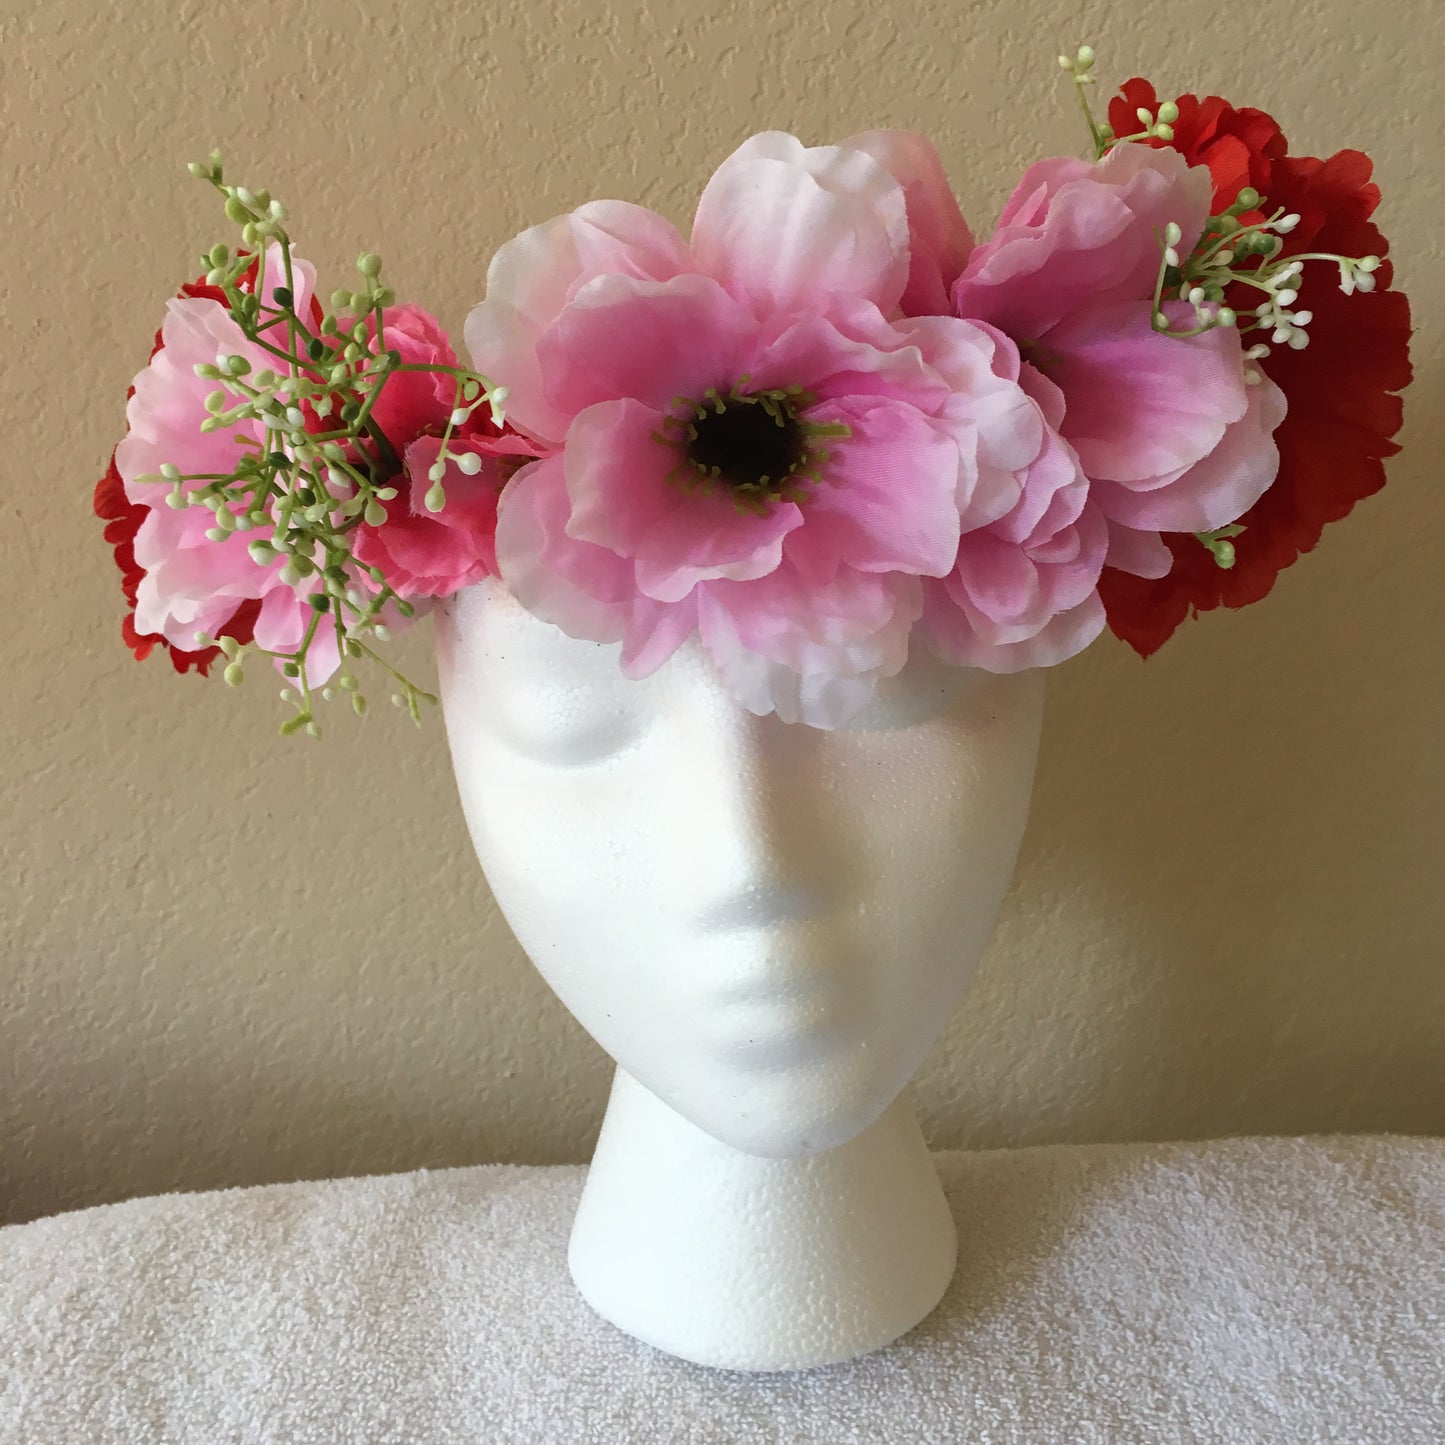 Large Wreath – Red & pink flowers